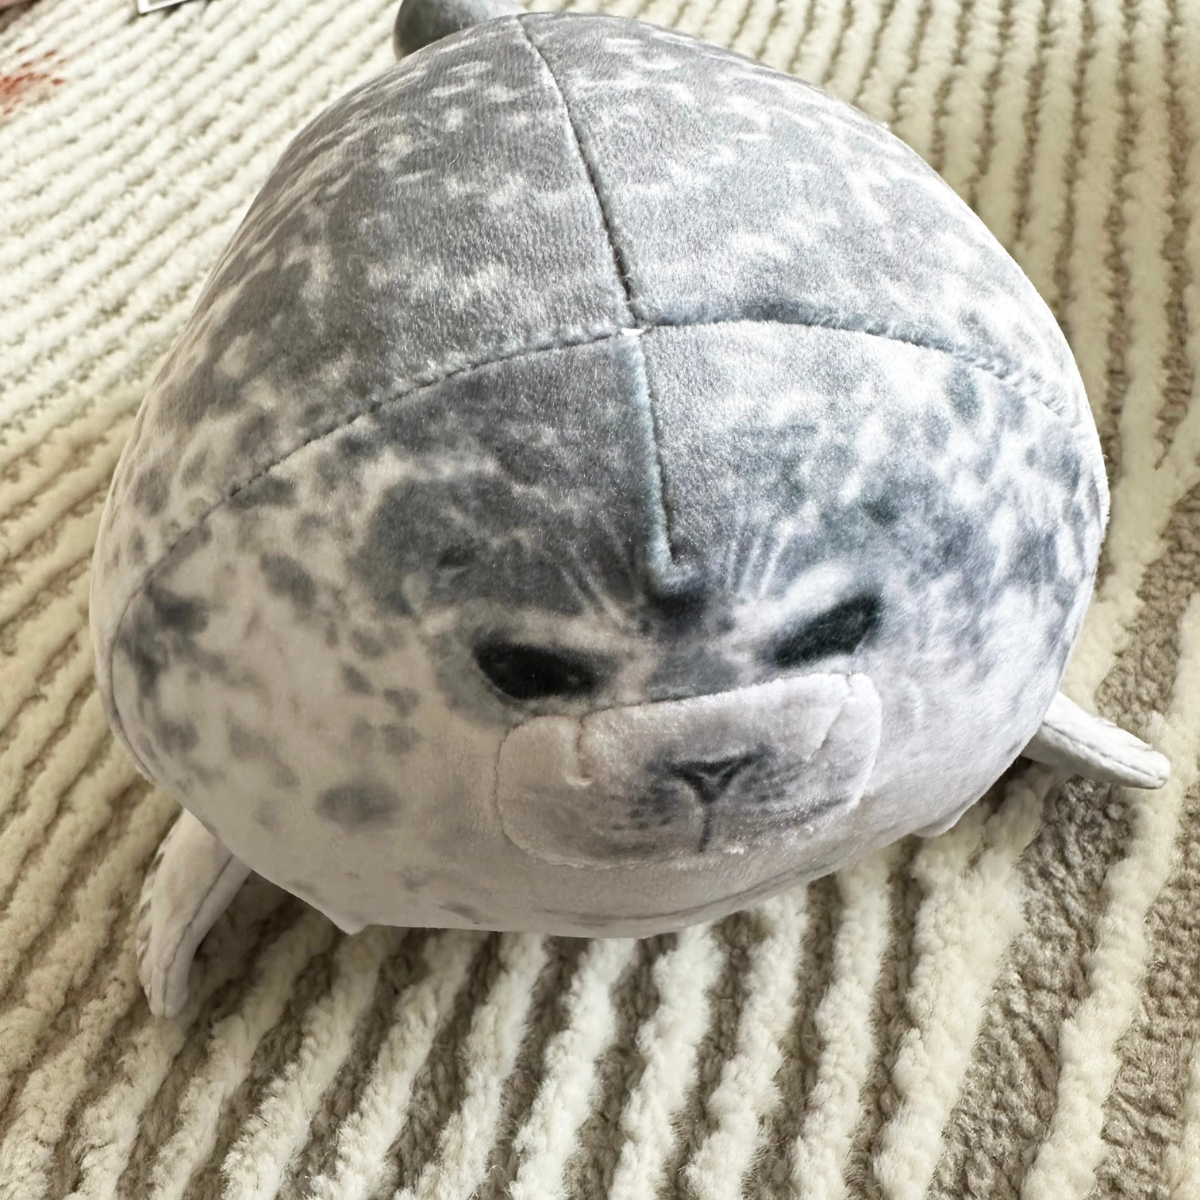 Snuggle Seal: Soft Seal Pillow – Your Charming Ocean Companion!